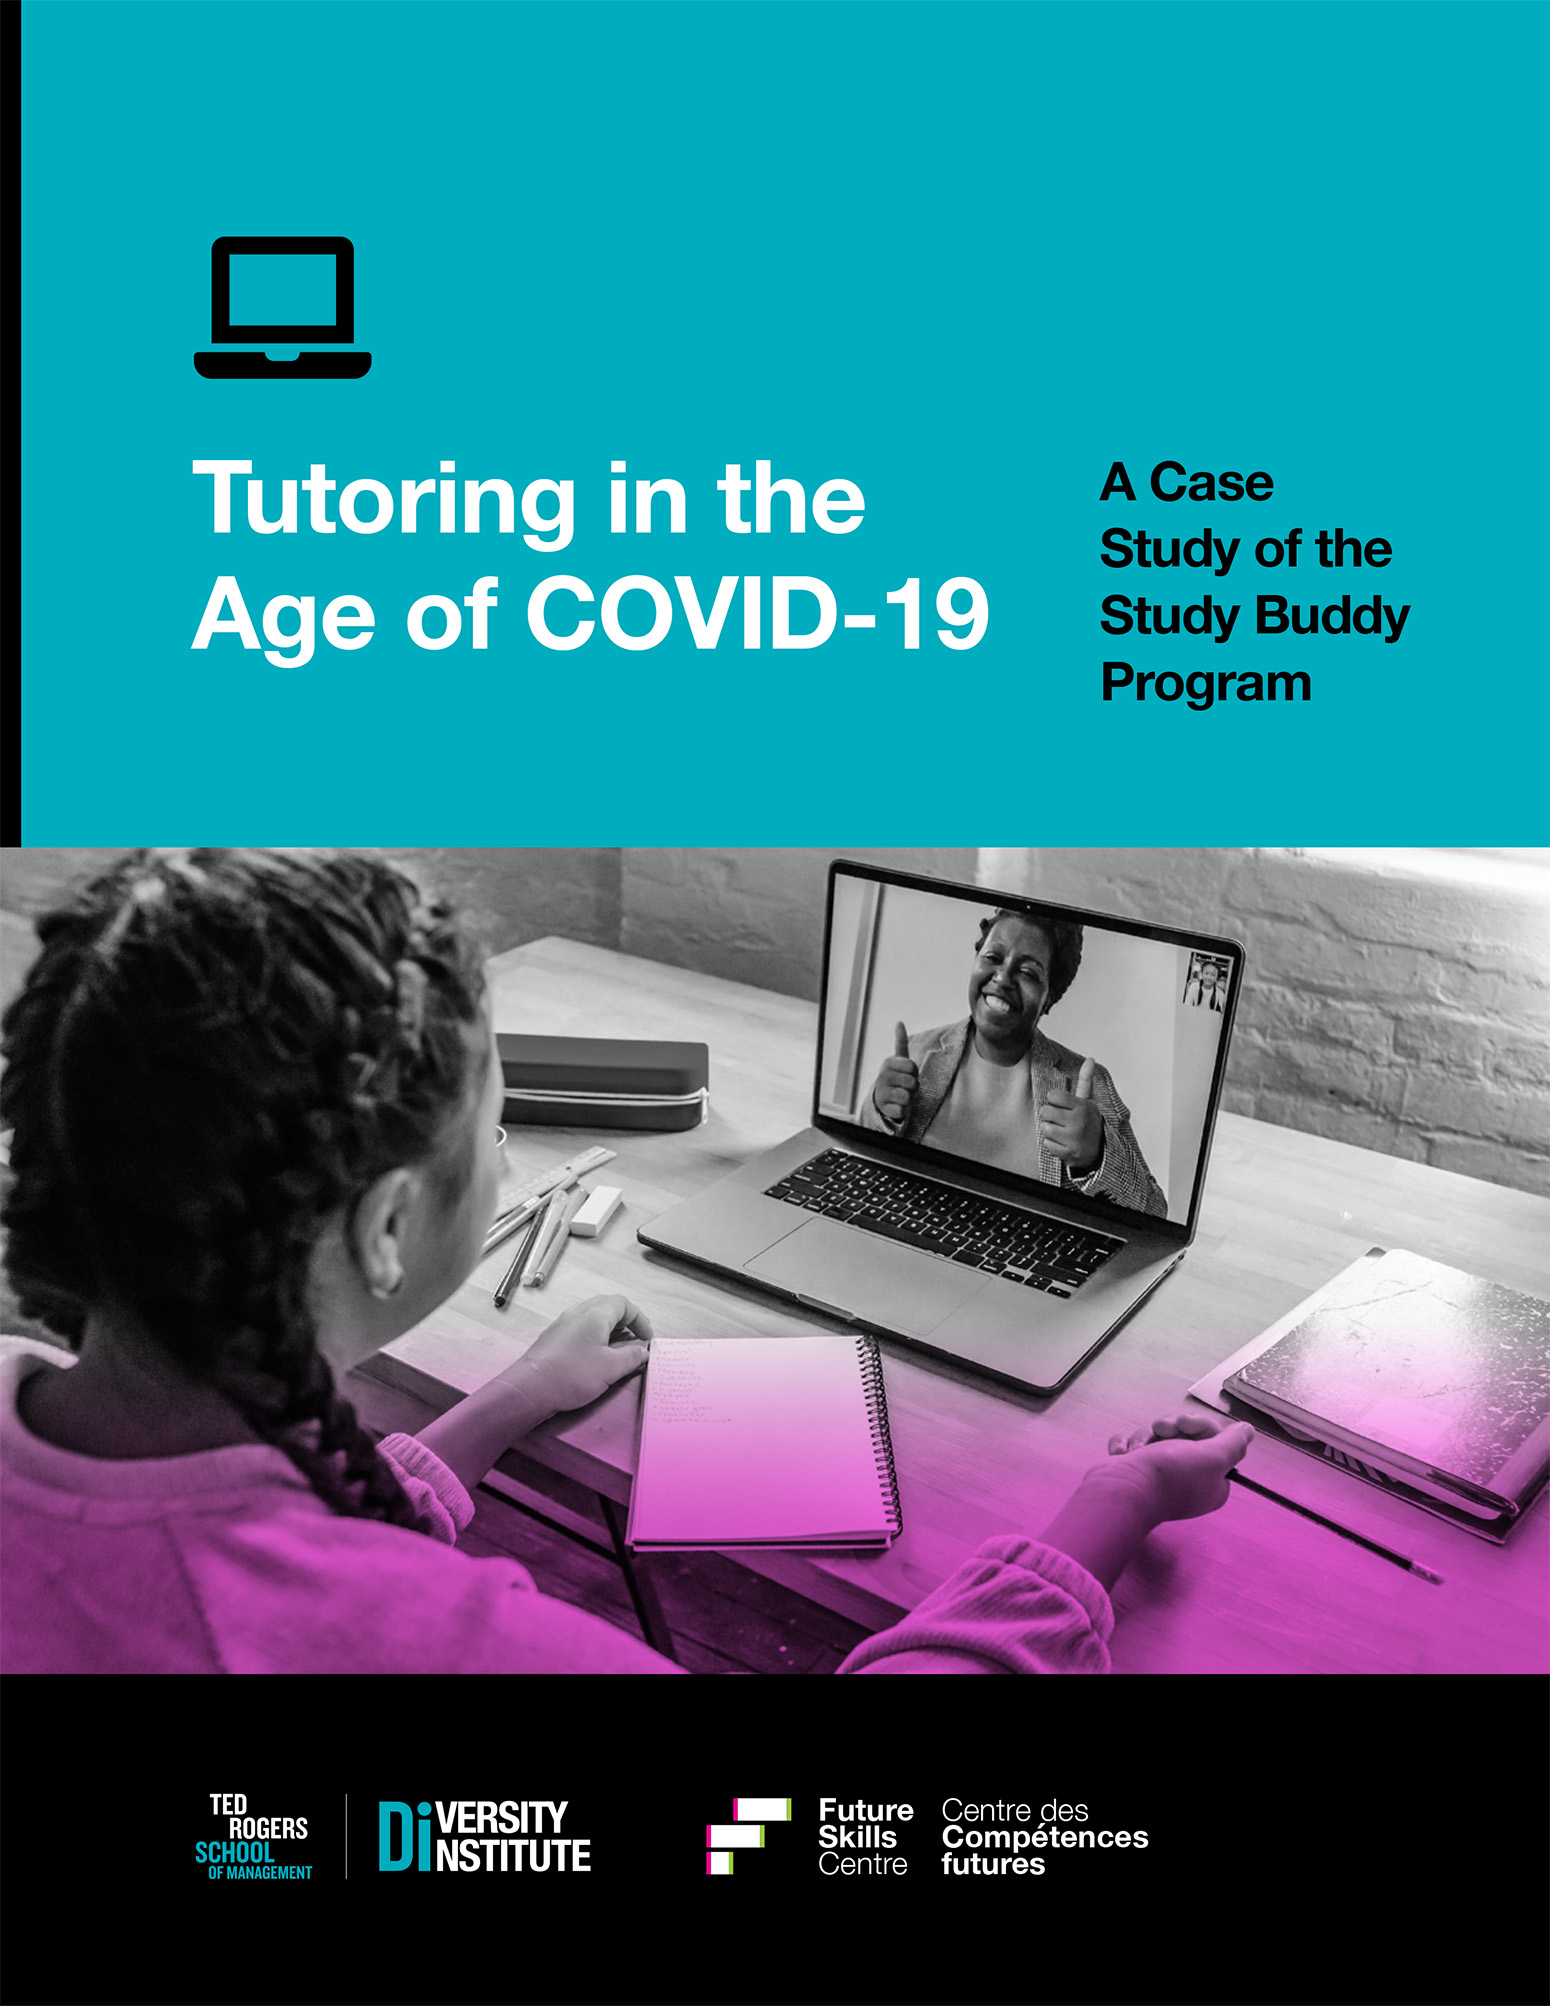 A young person recieves virtual tutoring on the Study Buddy report cover.